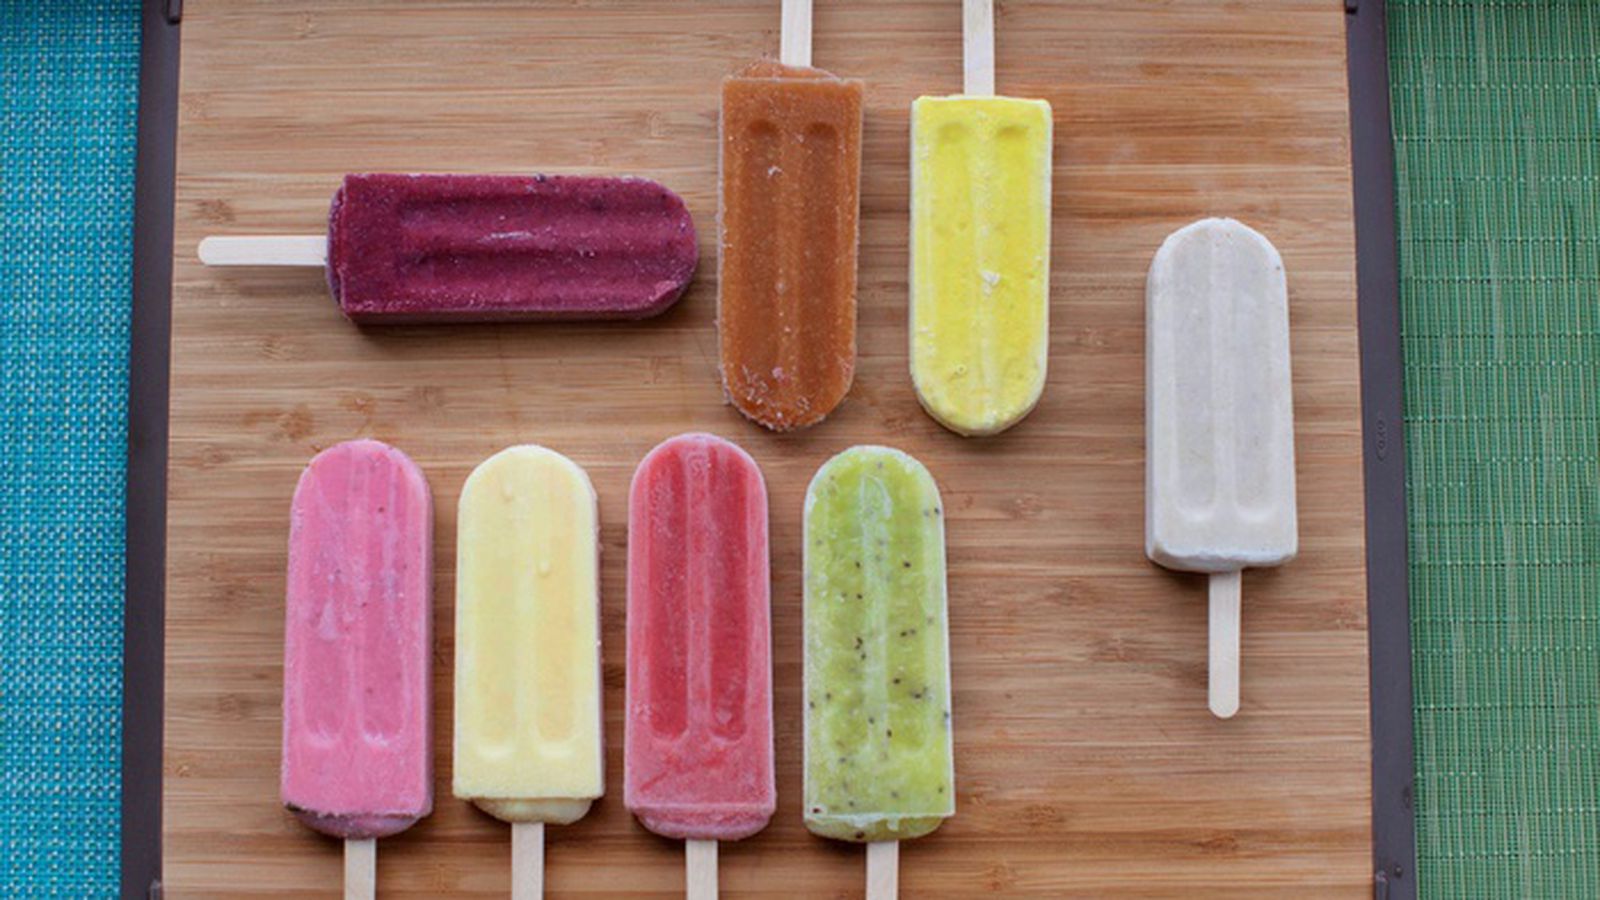 Fans poppsicle only Sodapopsicle/Soda popsicle